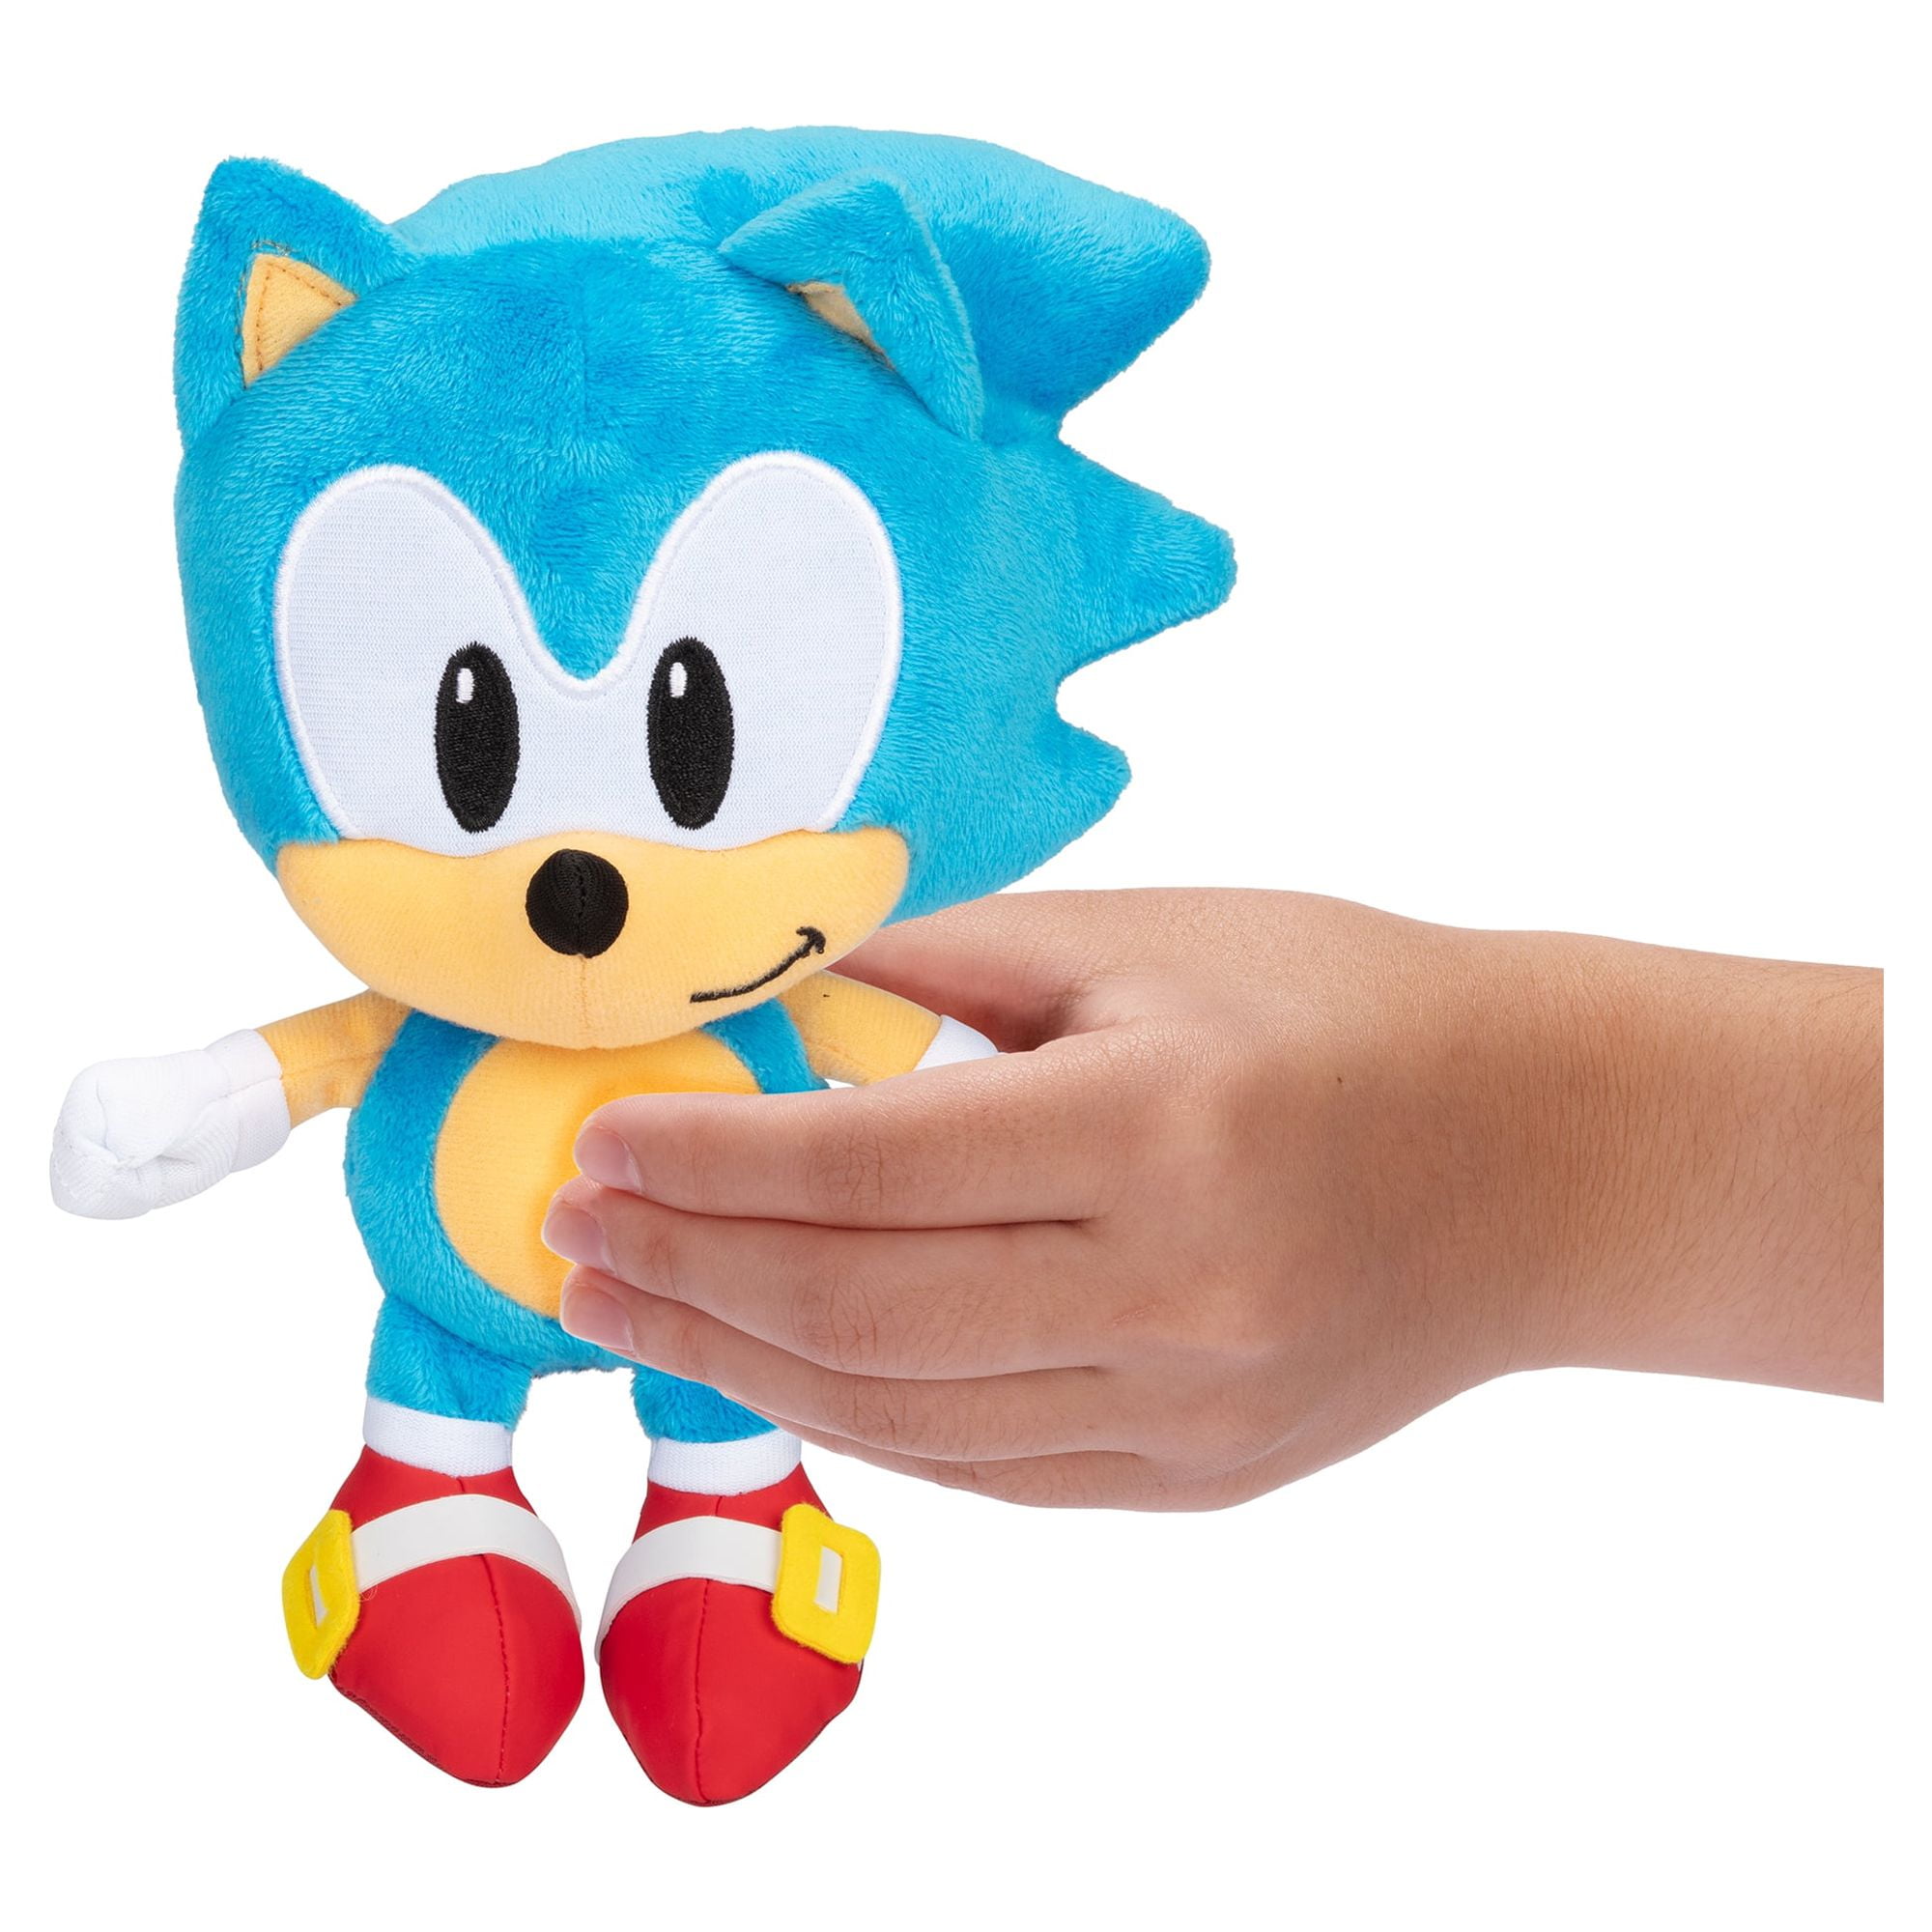 Tails EXE From Sonik Plush Toy Custom Plush Inspired by the 